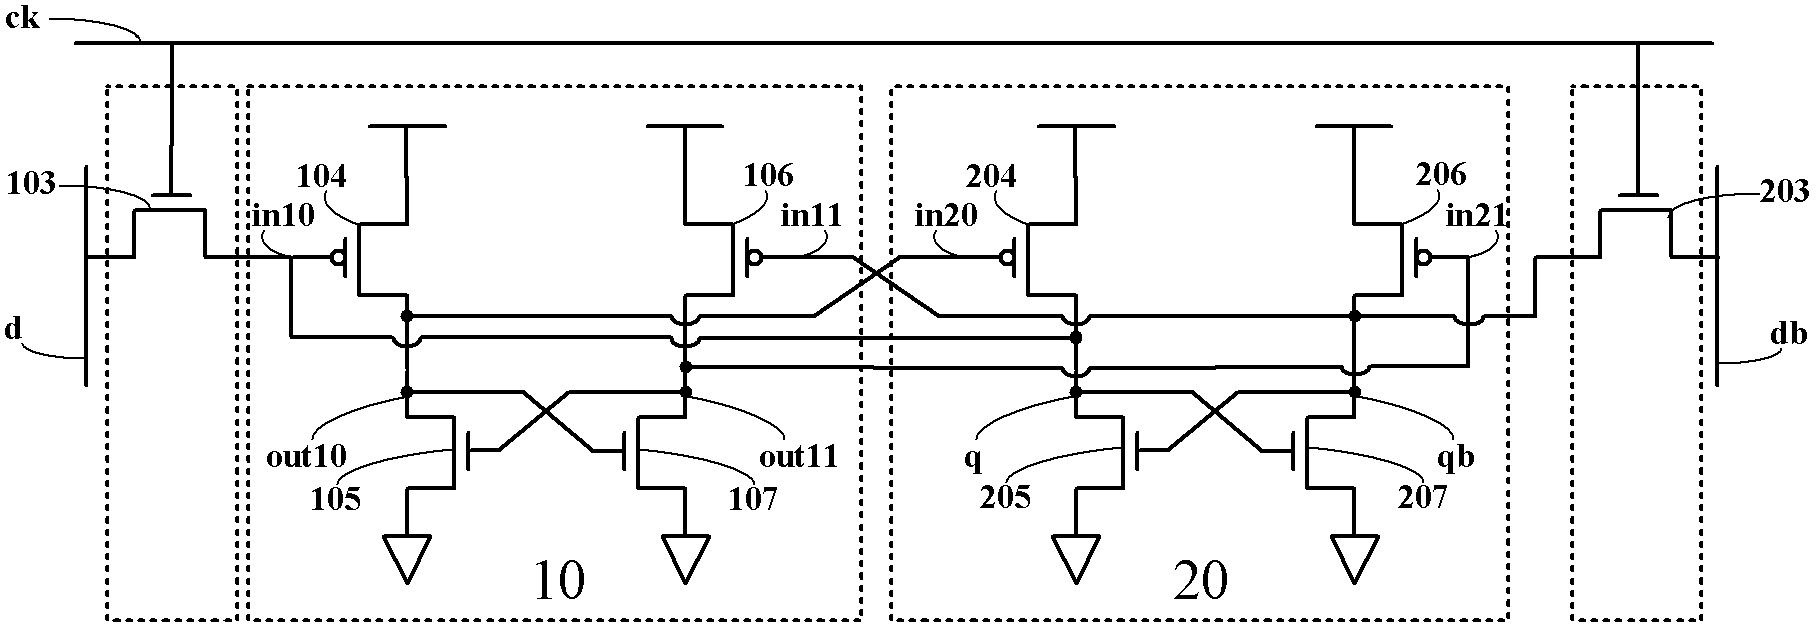 Register circuit with radiation reinforcing design